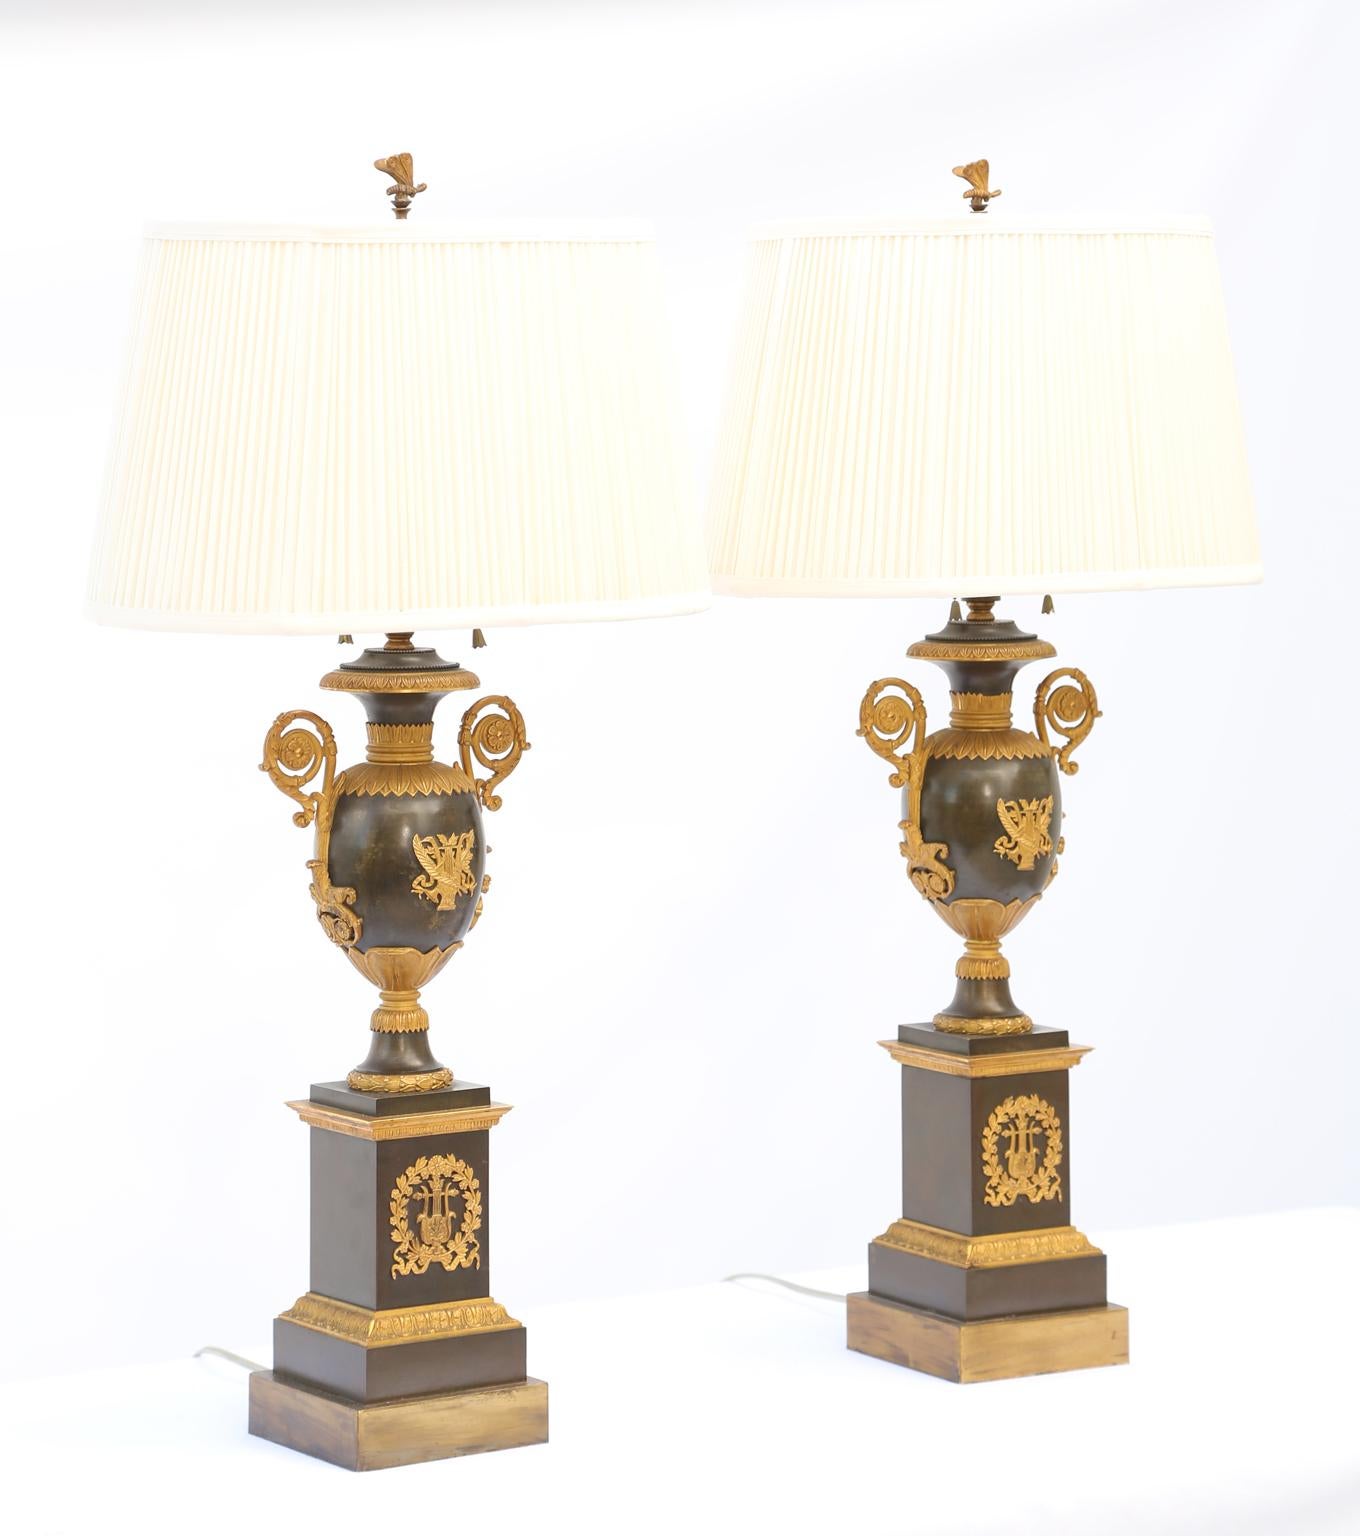 Fine pair of period Empire table lamps, of gilt and patinated bronze, each having an urn, centered by a lyre, ribbons, and laureling, its foliate-chased neck and shoulder are flanked by elaborate scrolling handles centered with a rosette,